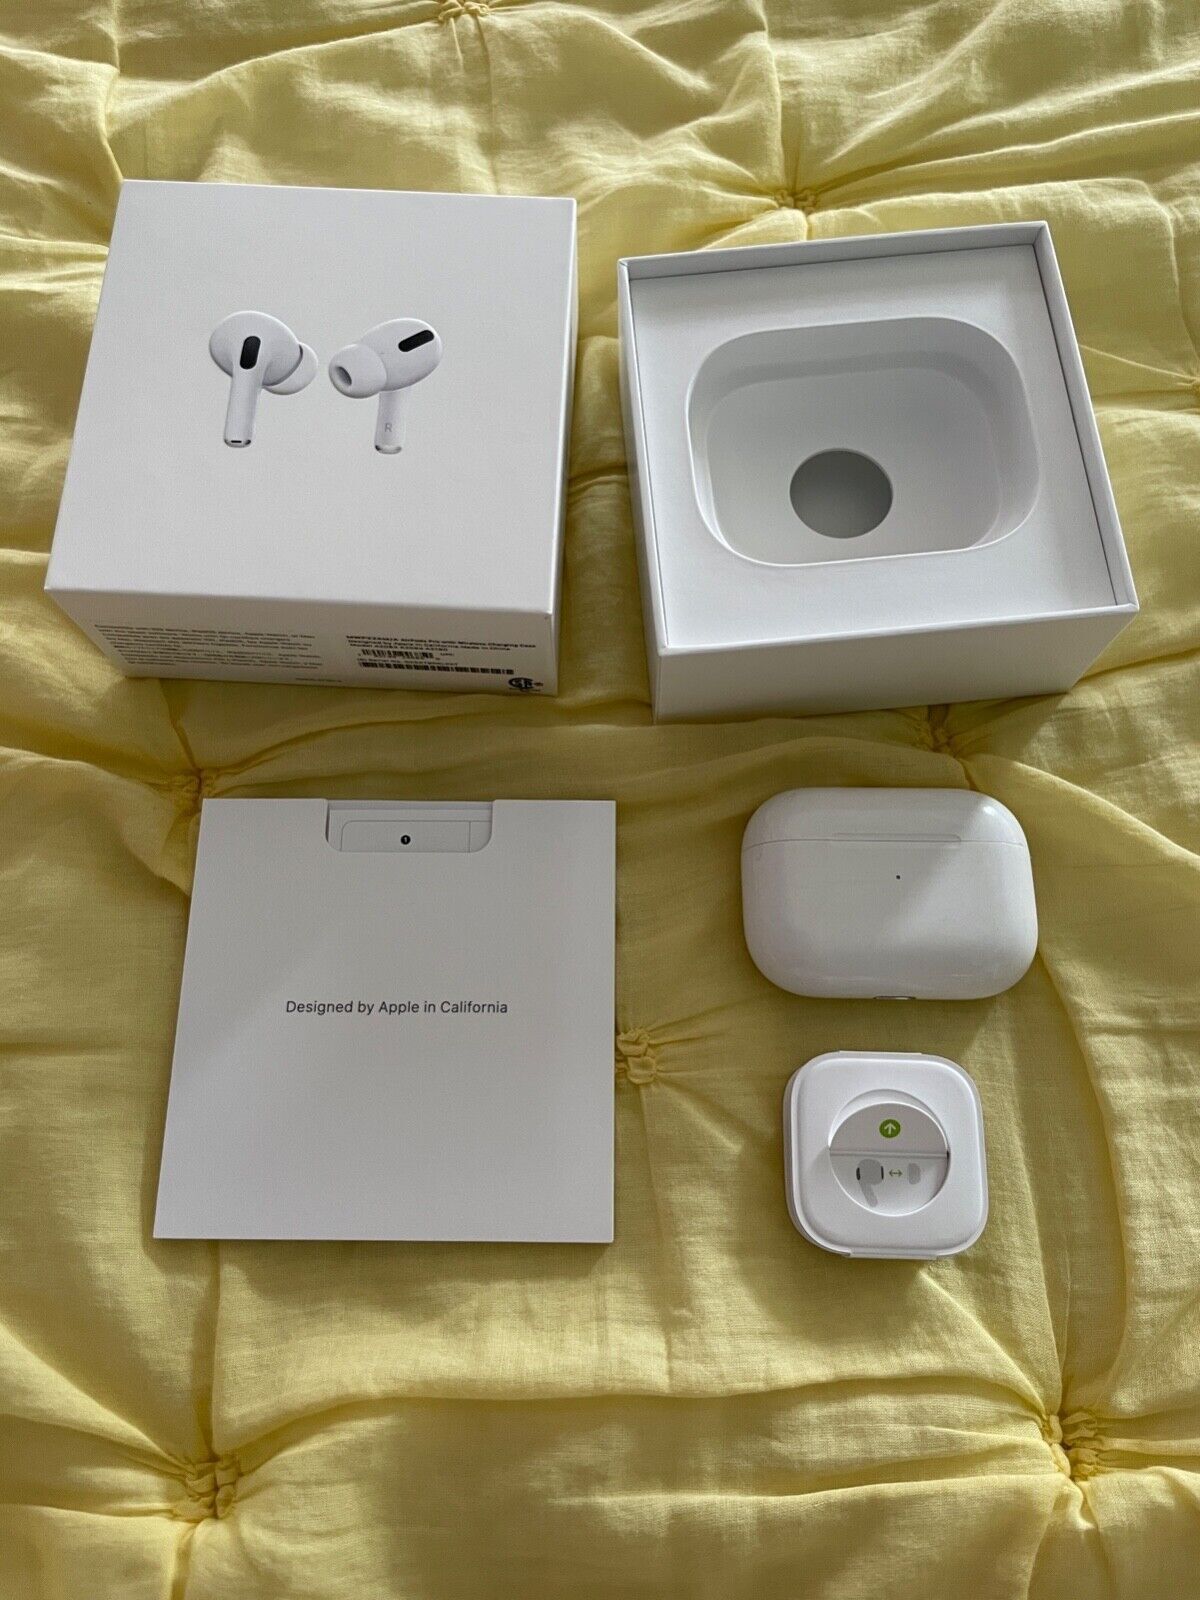 *NEW*For AirPods Pro 1st Generation With Magsafe Wireless Charging Case- White